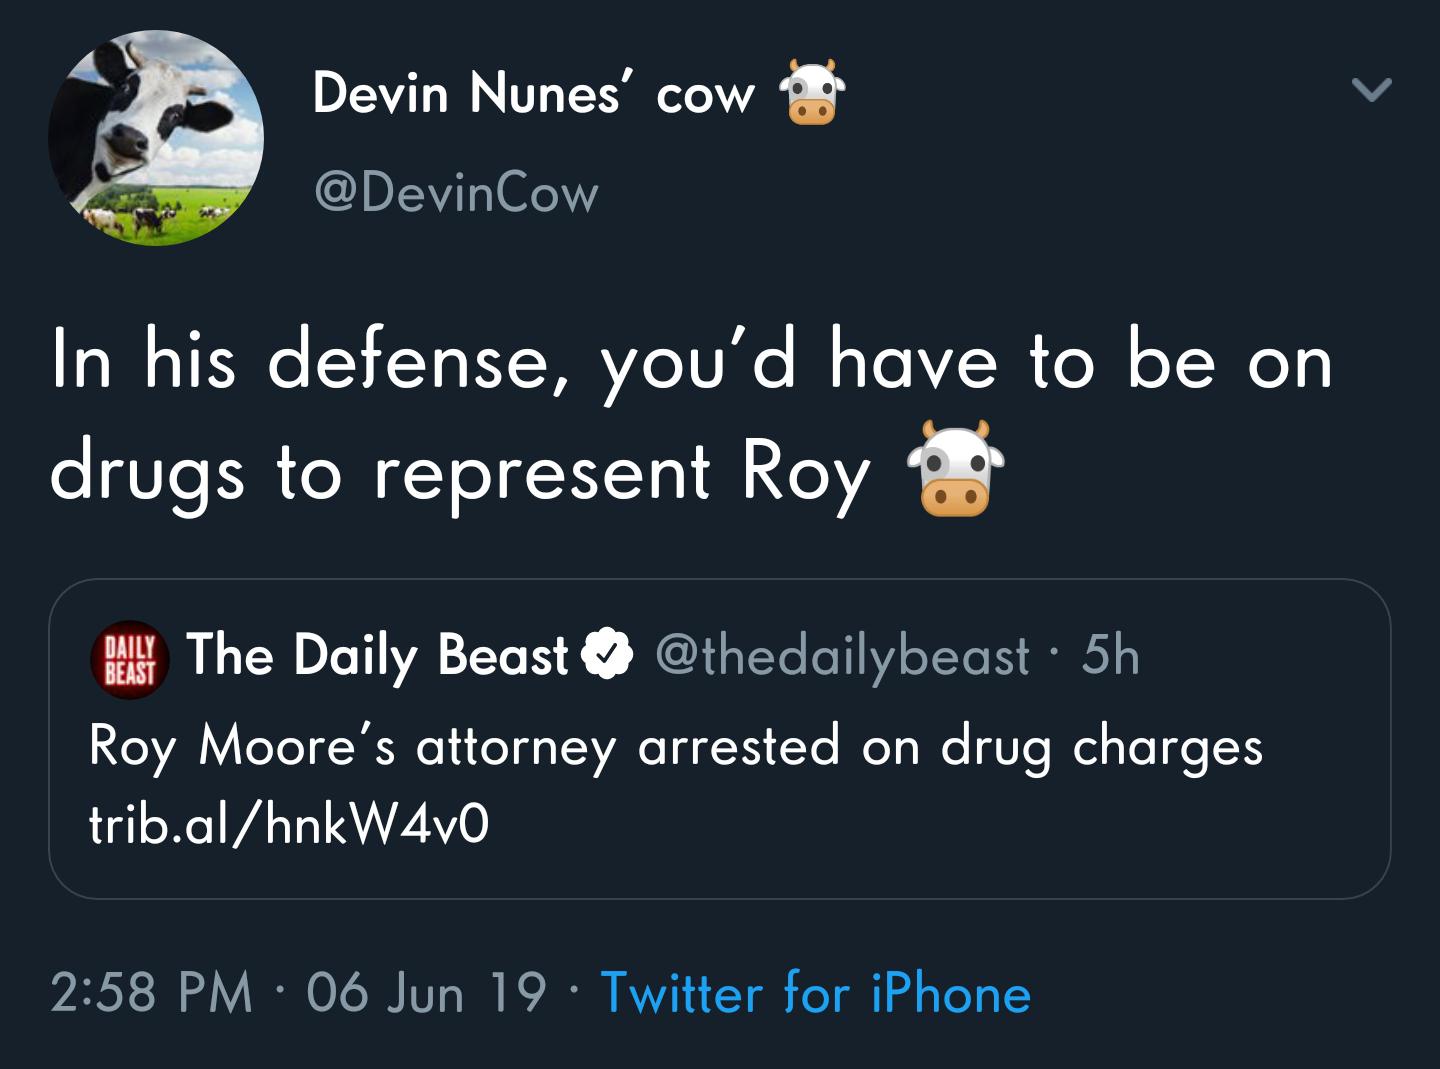 screenshot - Devin Nunes' cow In his defense, you'd have to be on drugs to represent Roy Dani Ract Best The Daily Beast 5h Roy Moore's attorney arrested on drug charges trib.alhnkW4v0 06 Jun 19 Twitter for iPhone